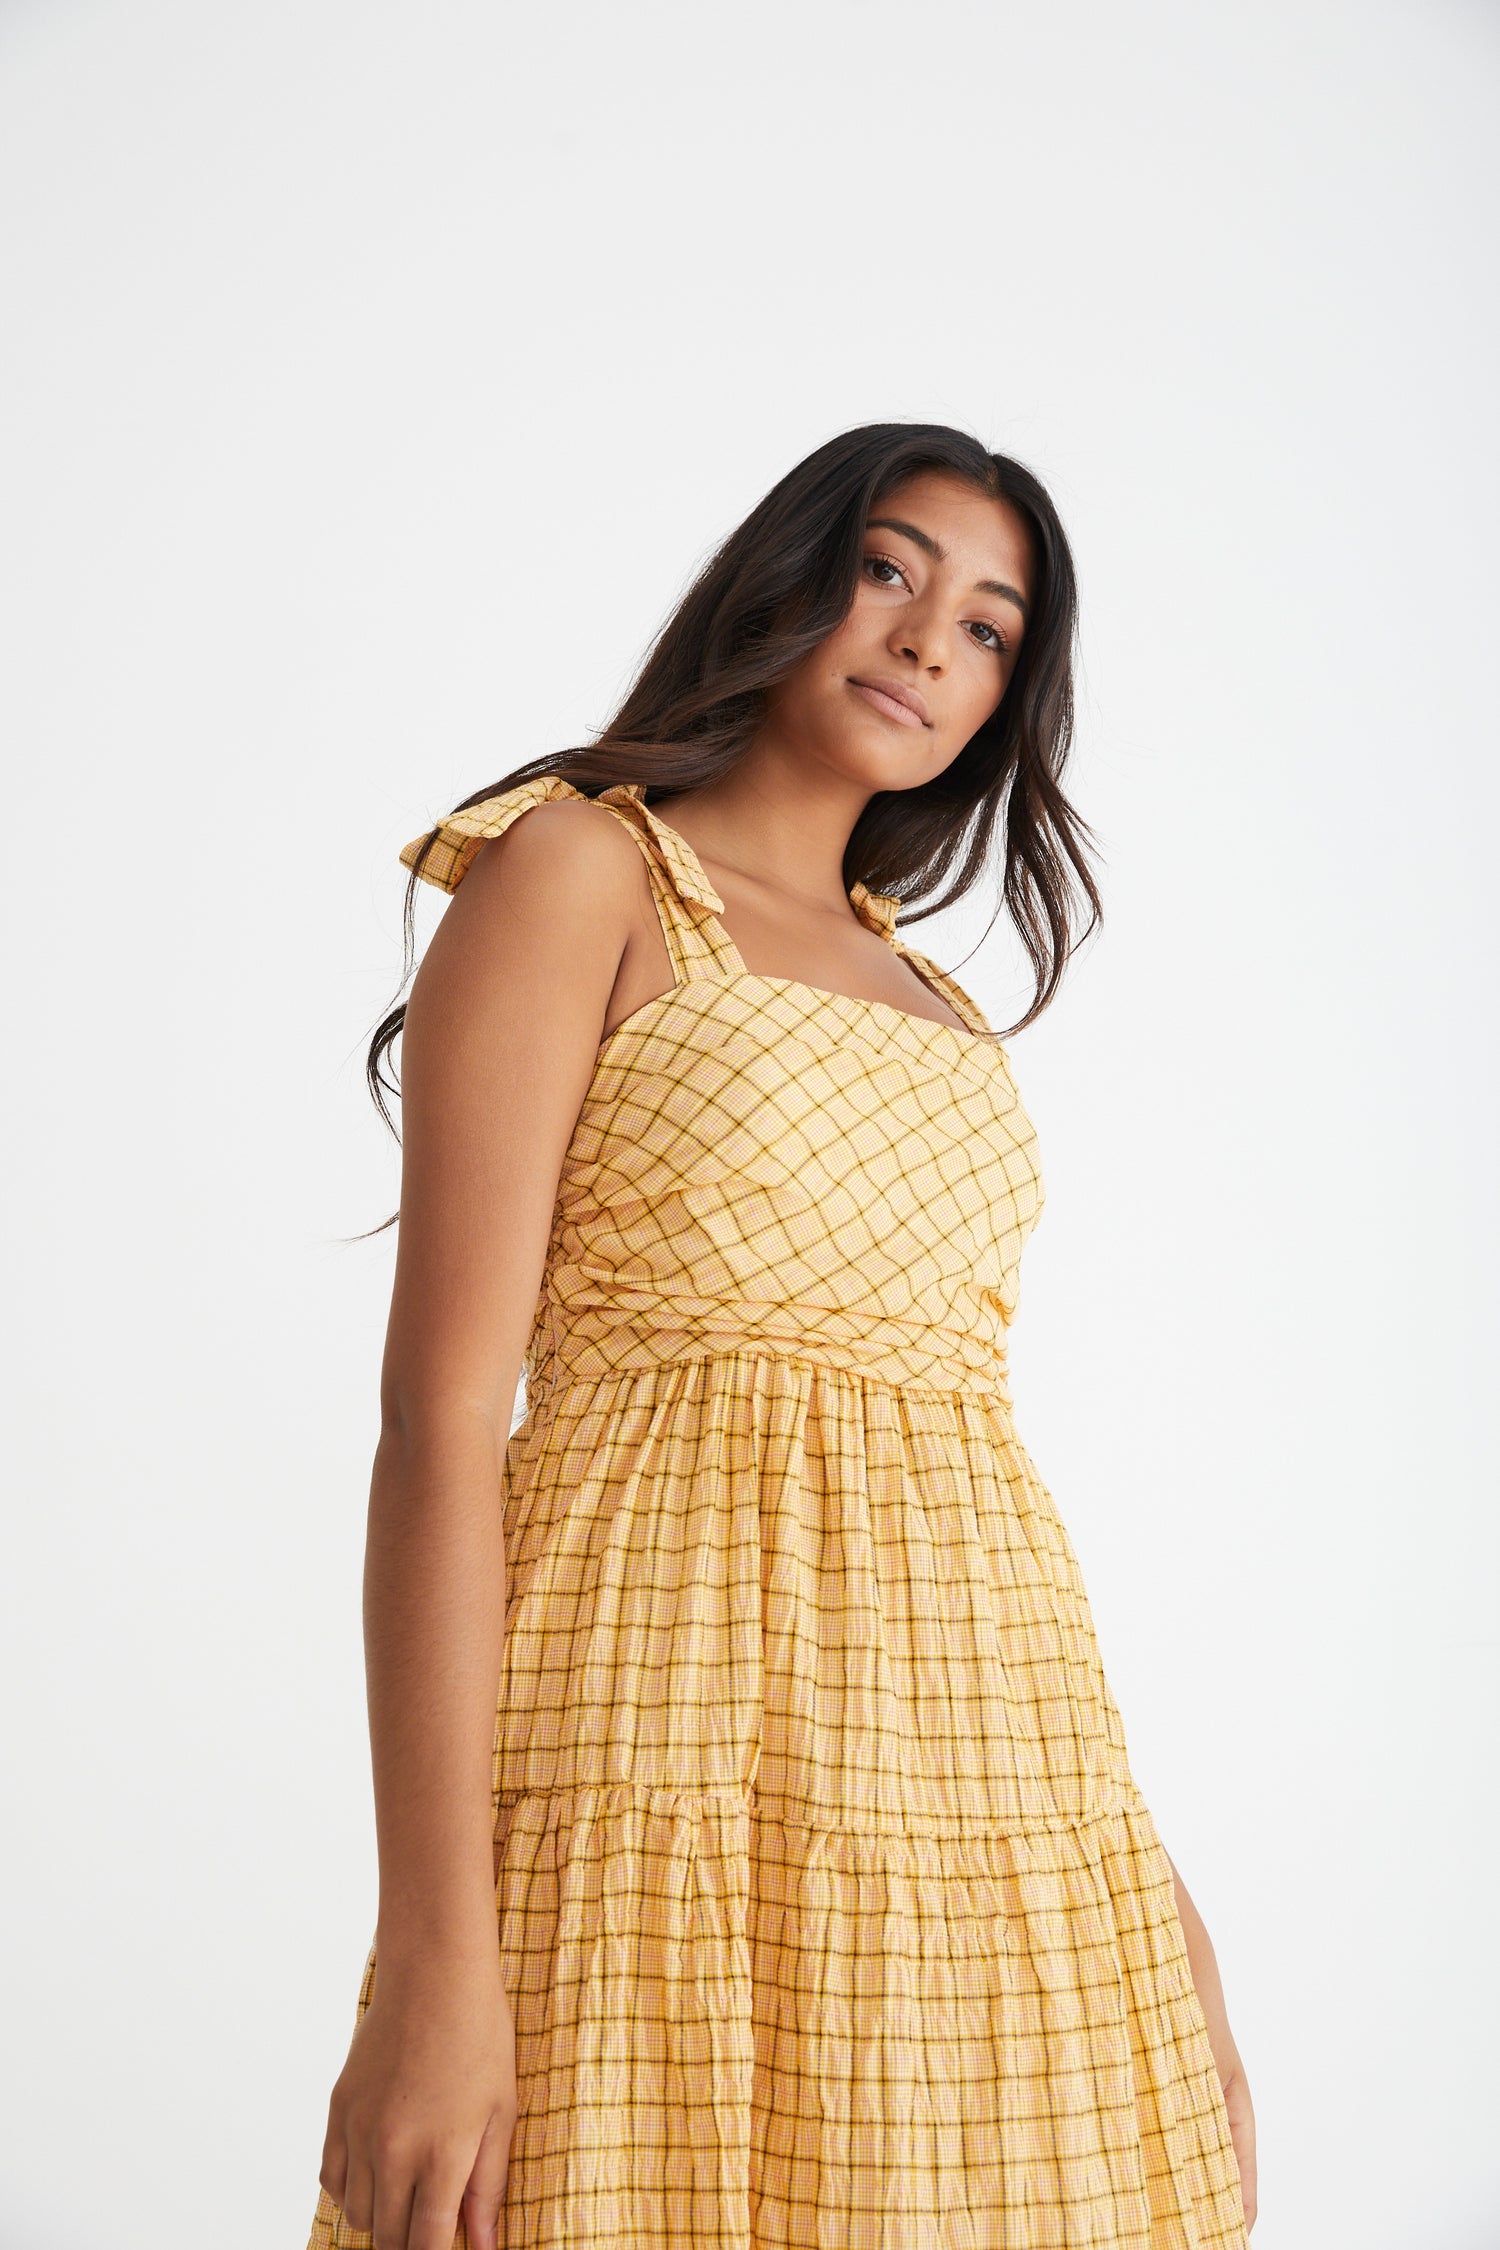 Sunflower maxi with tiered and gathered skirt, rouched bodice and tie up straps in a buttercup yellow and brown check print